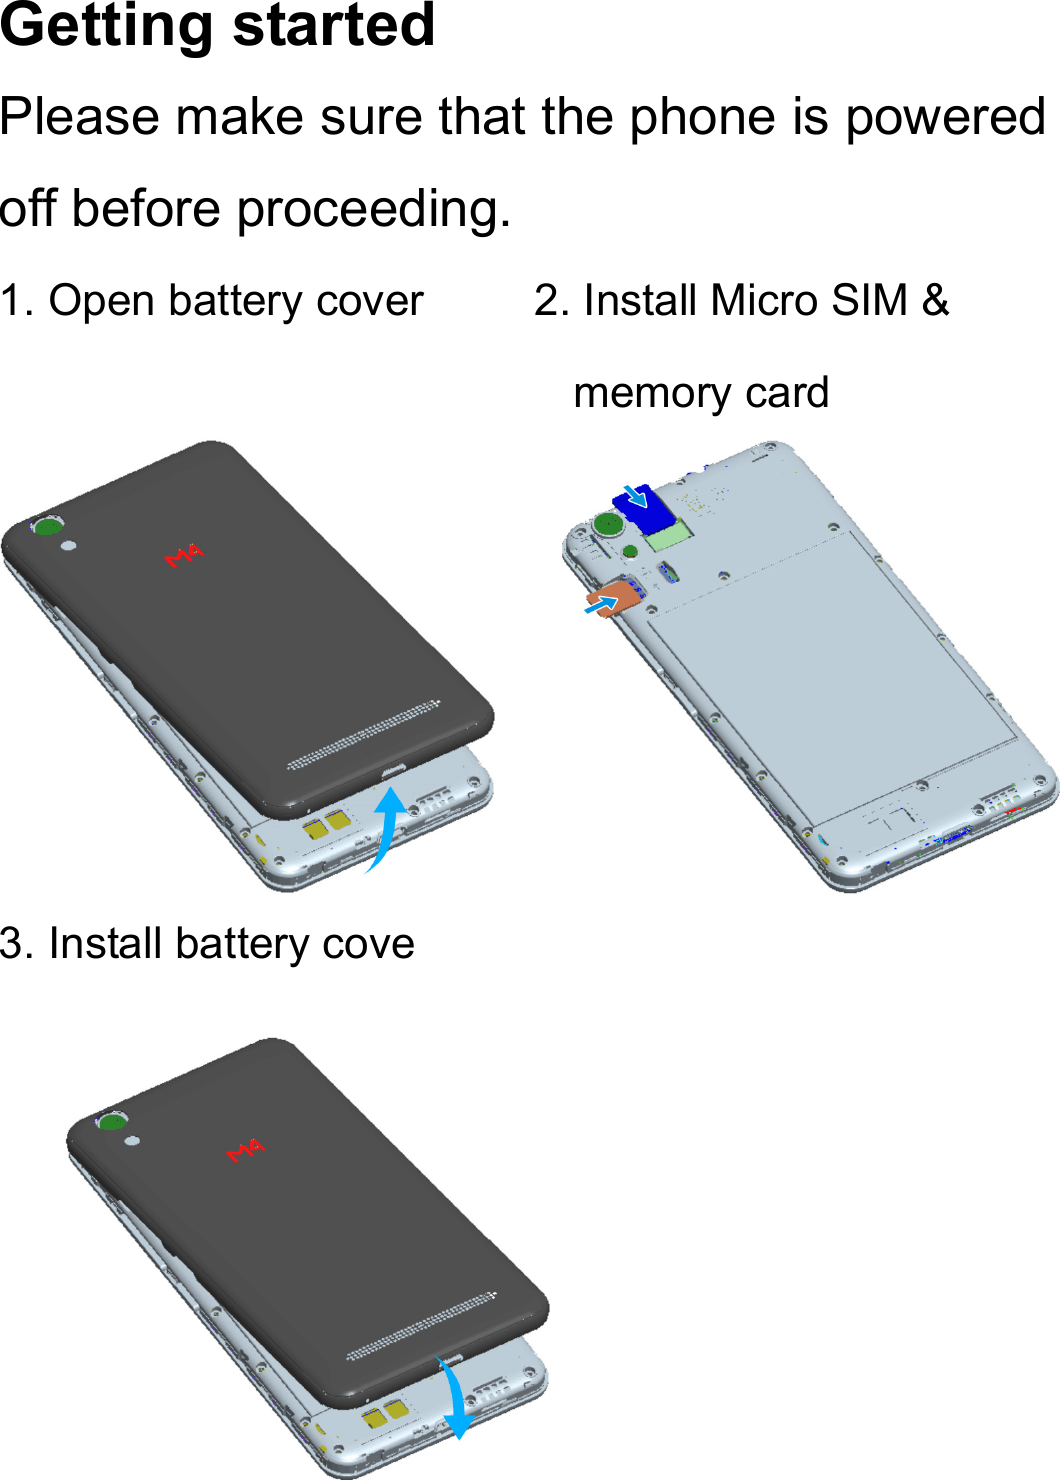 Getting started Please make sure that the phone is powered off before proceeding. 1. Open battery cover          2. Install Micro SIM &amp; memory card      3. Install battery cove            